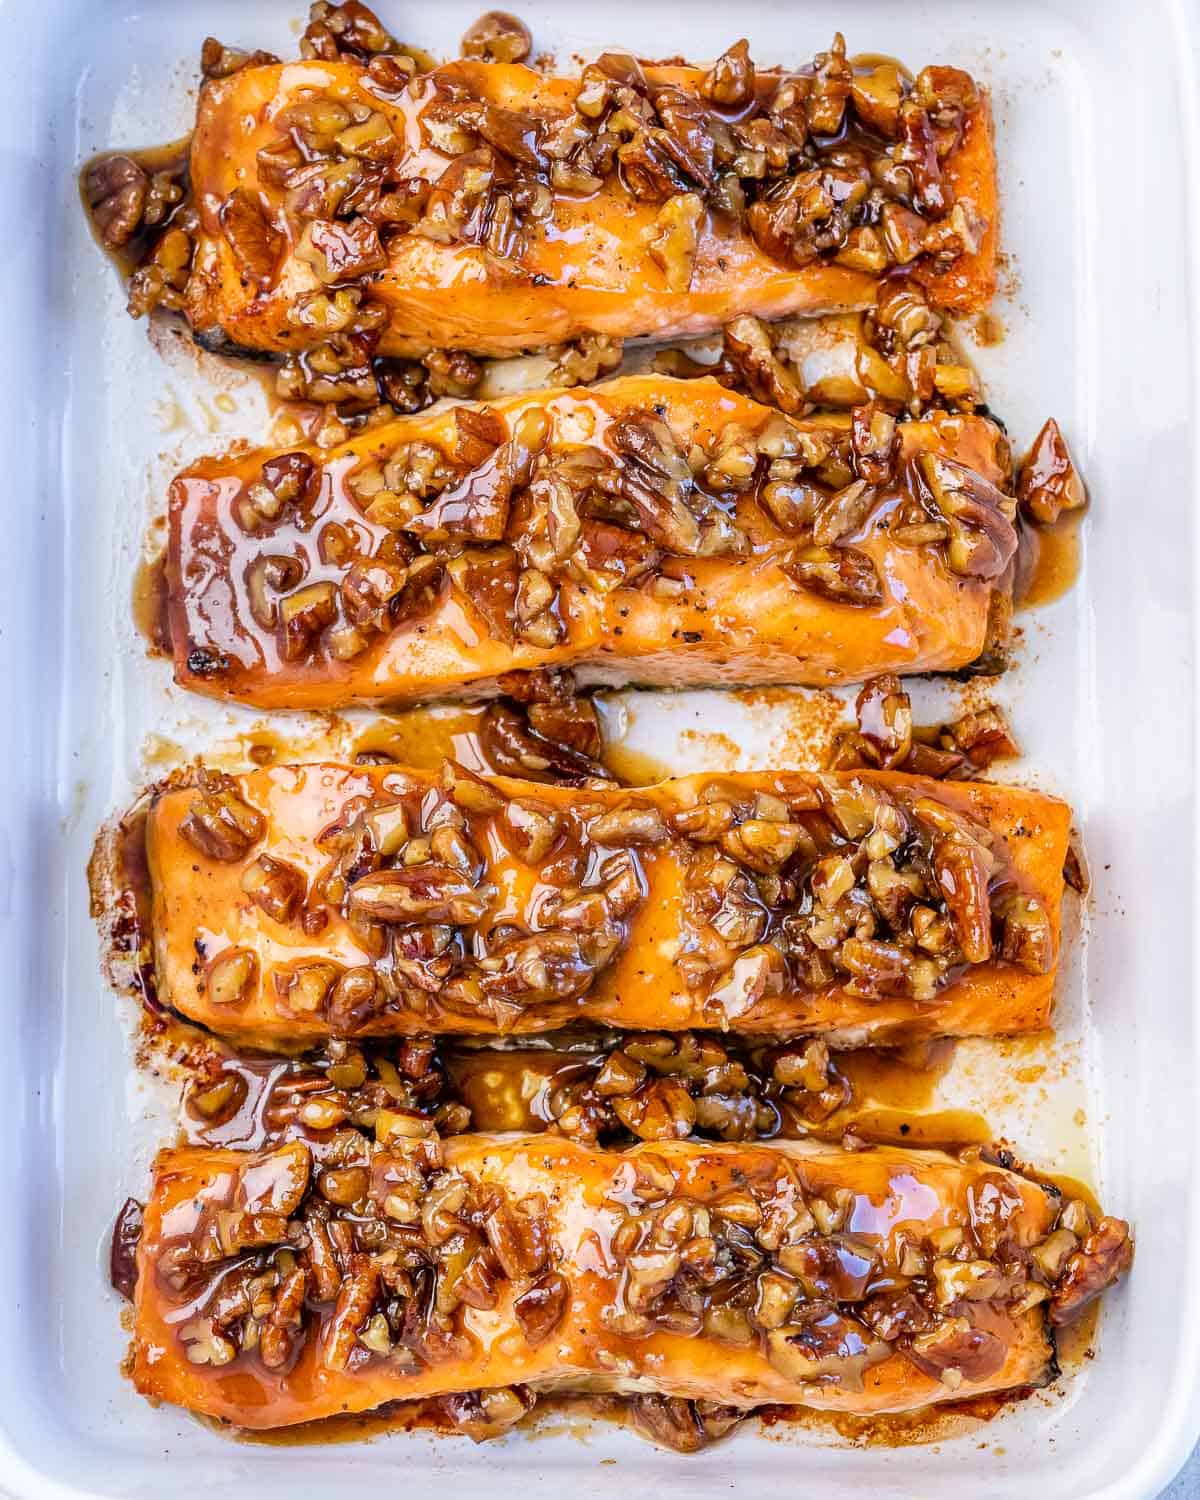 Top view of baked salmon topped with pecans glazed with maple syrup in a white baking dish.